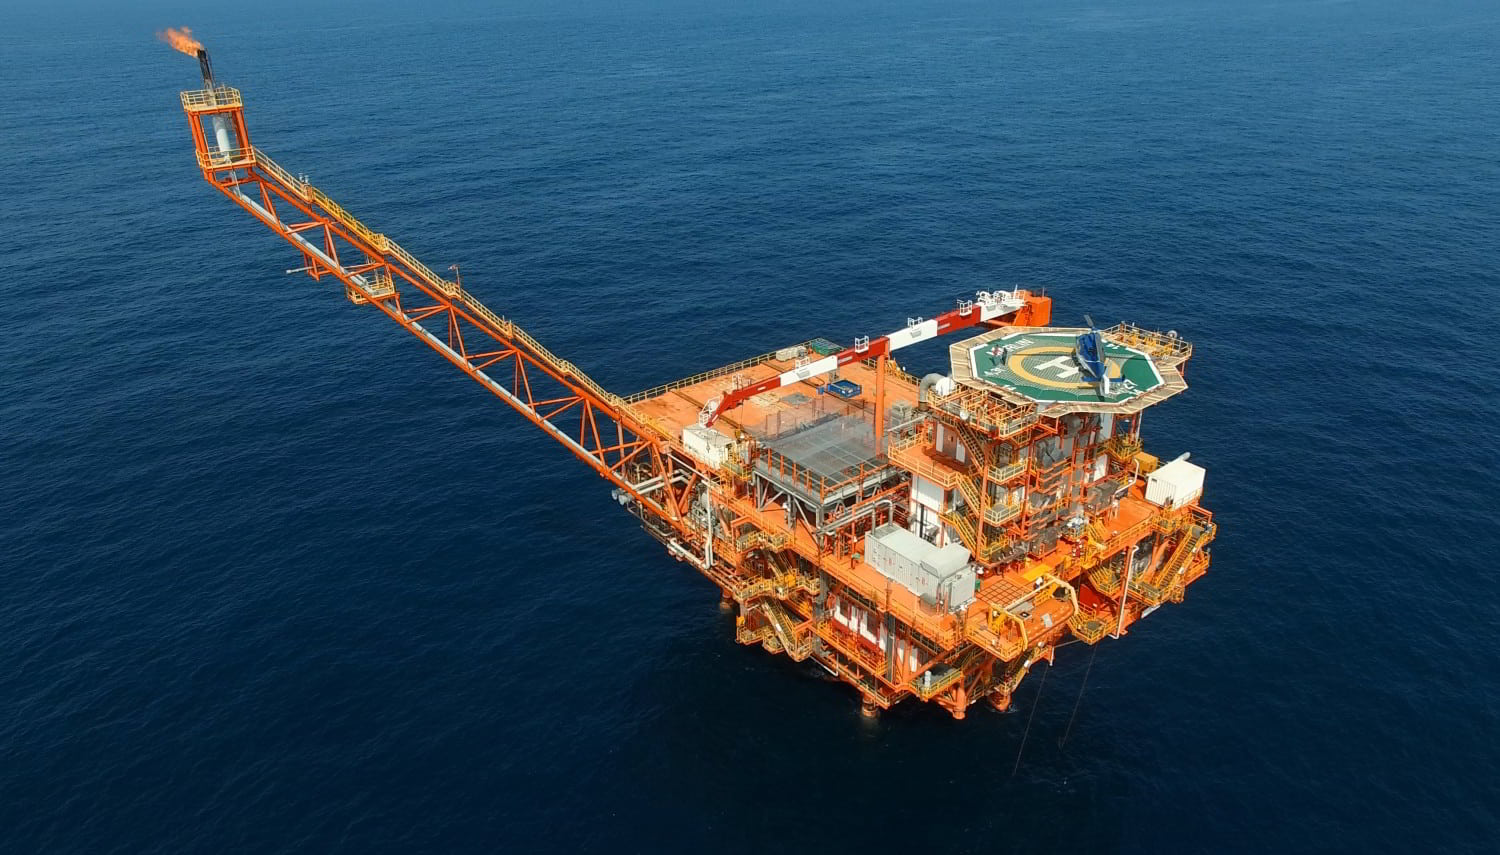 Norwegian player moves to expand its oil & gas portfolio with assets in West Africa